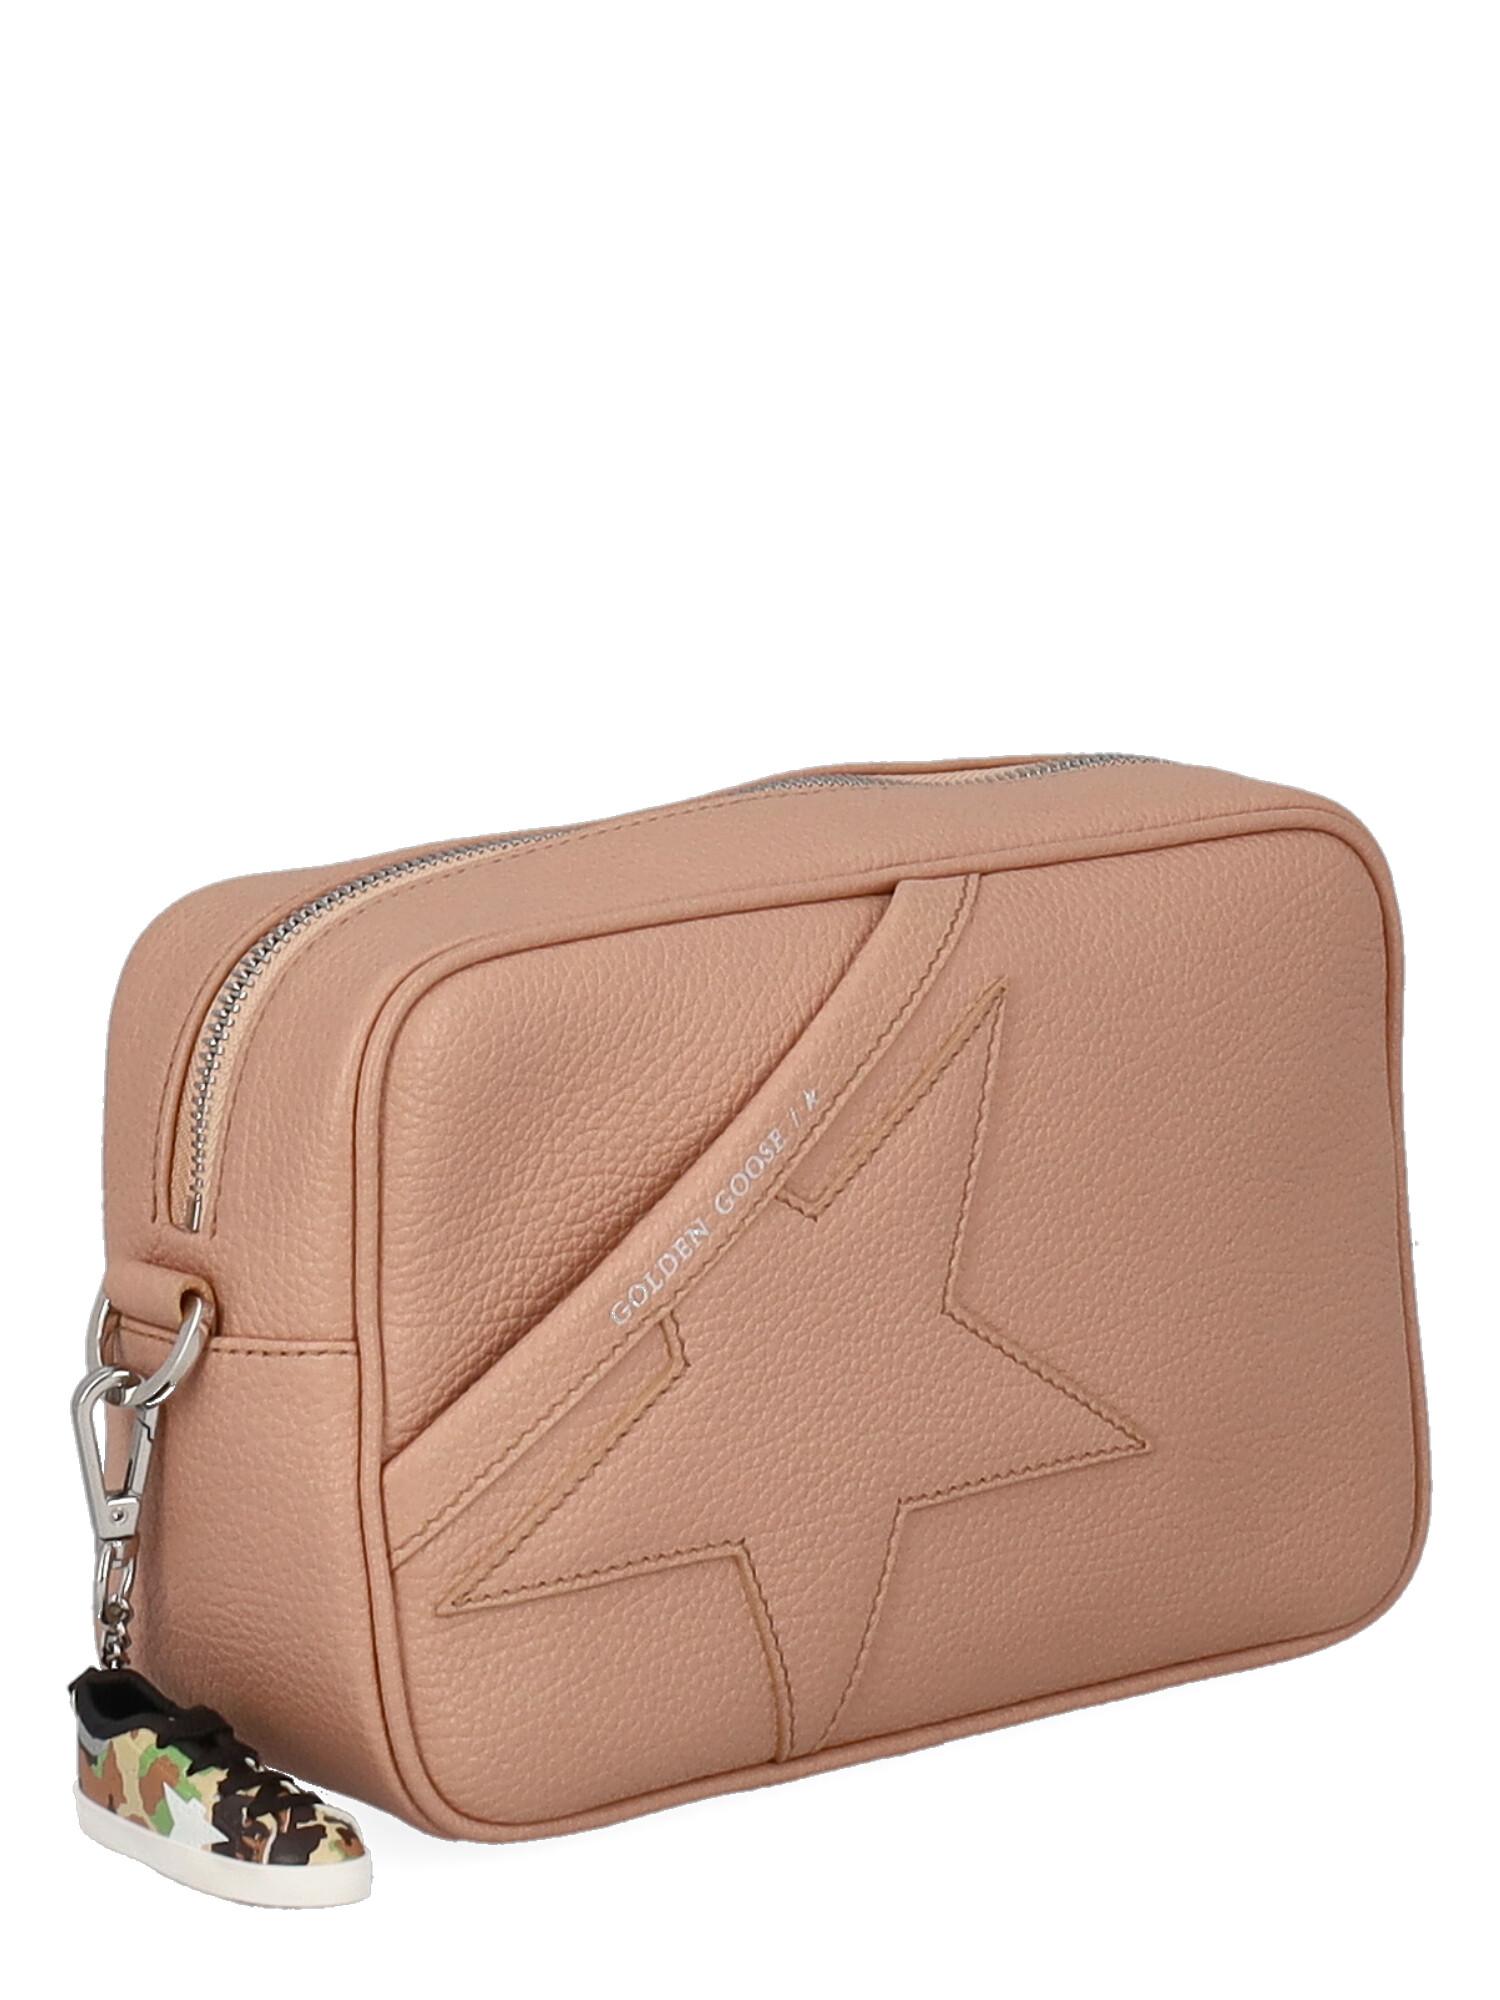 Cross body bag, leather, solid color, logo print to the front, zipper fastening, silver-tone hardware, internal pocket, day bag

Includes:
- Dust Bag
- Shoulder strap

Product Condition: Excellent

Measurements:
Height: 14 cm
Depth: 8 cm
Width: 21